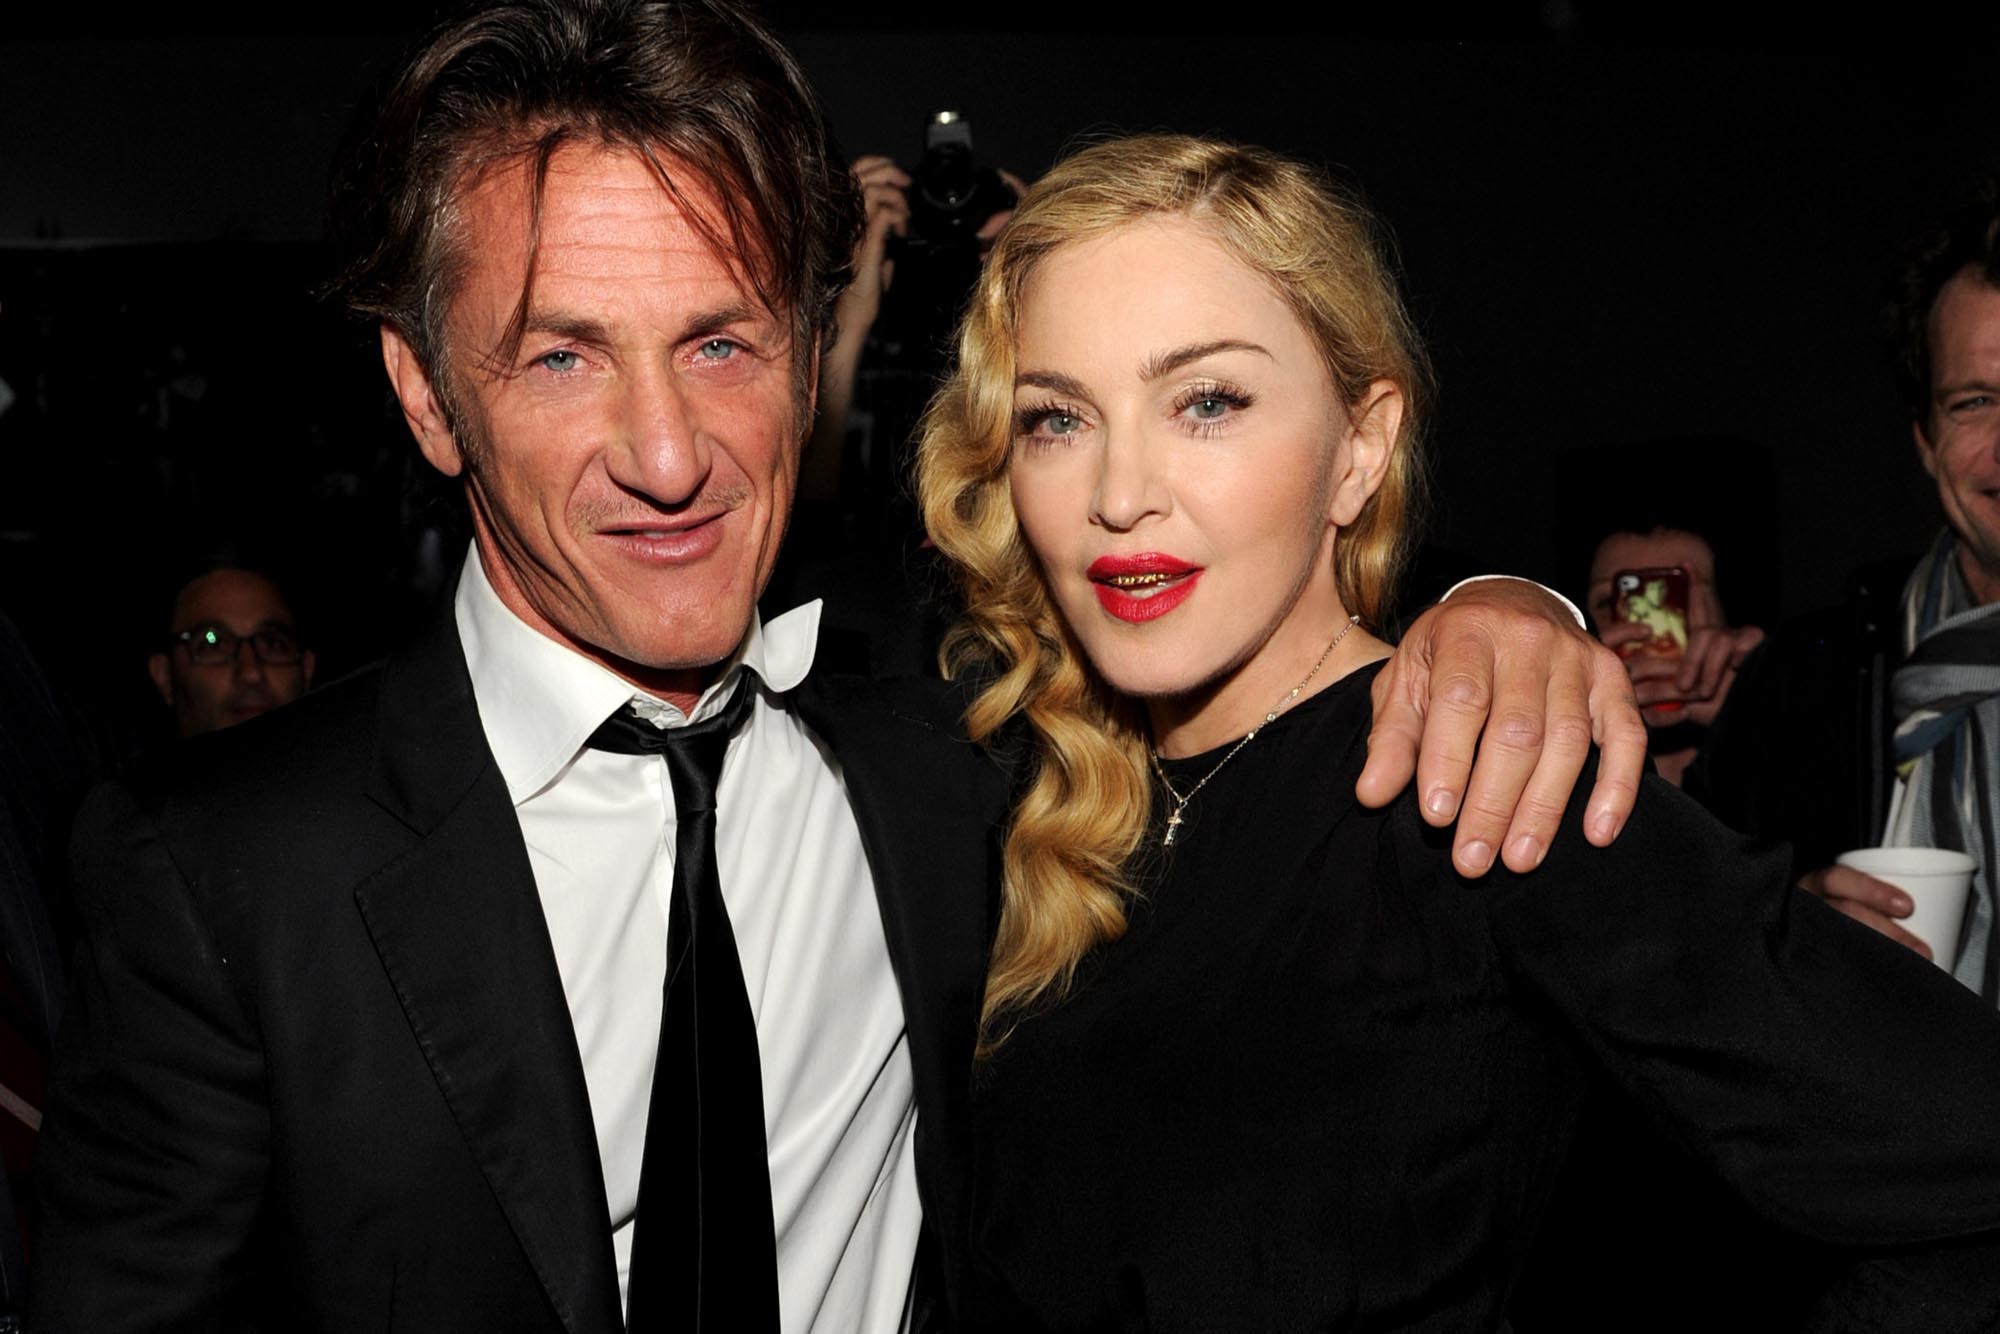 NEW YORK, NY - SEPTEMBER 24:  (Exclusive Coverage)  Sean Penn and Madonna attend Madonna and Steven Klein secretprojectrevolution at the Gagosian Gallery on September 24, 2013 in New York City.  (Photo by Kevin Mazur/Getty Images)